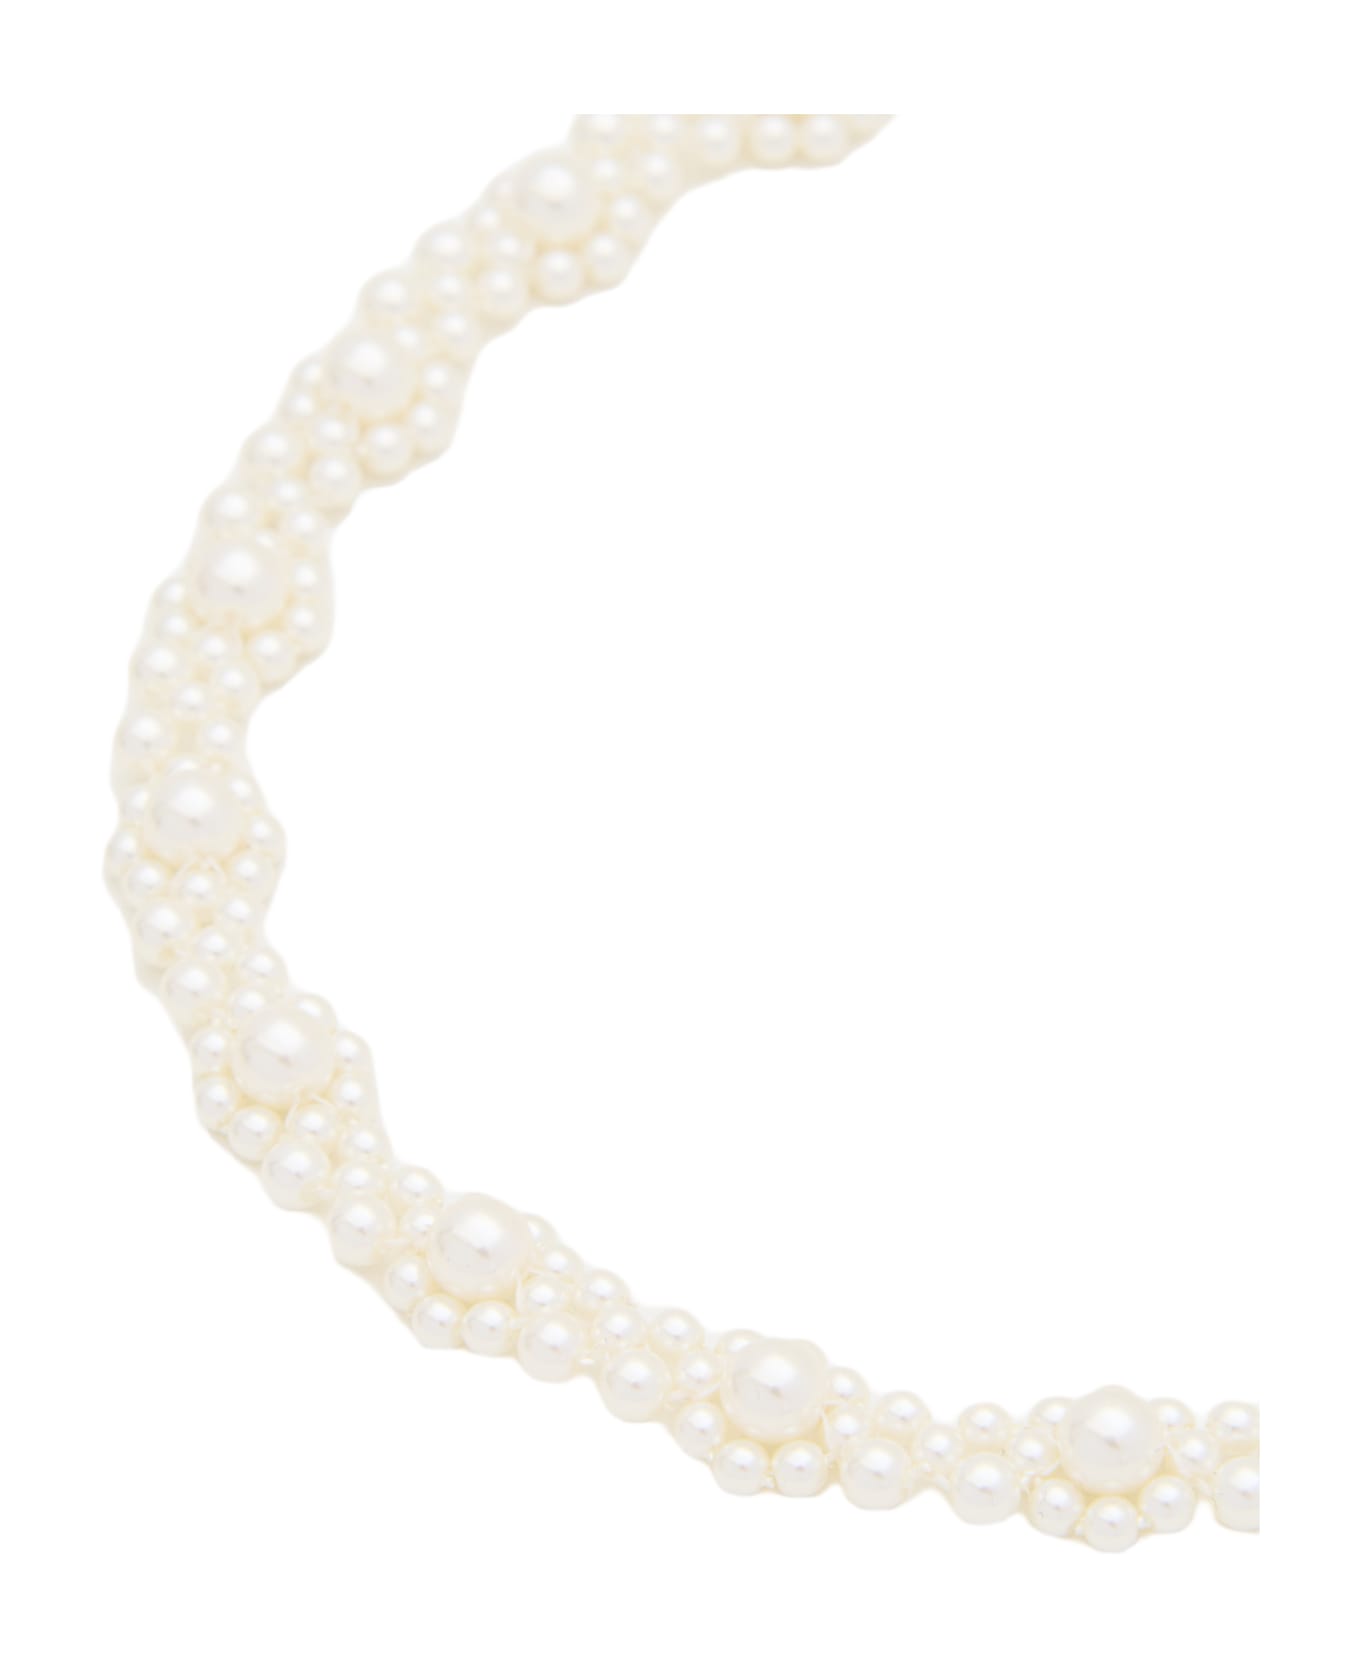 Simone Rocha Crystal Daisy Chain Necklace - White ネックレス